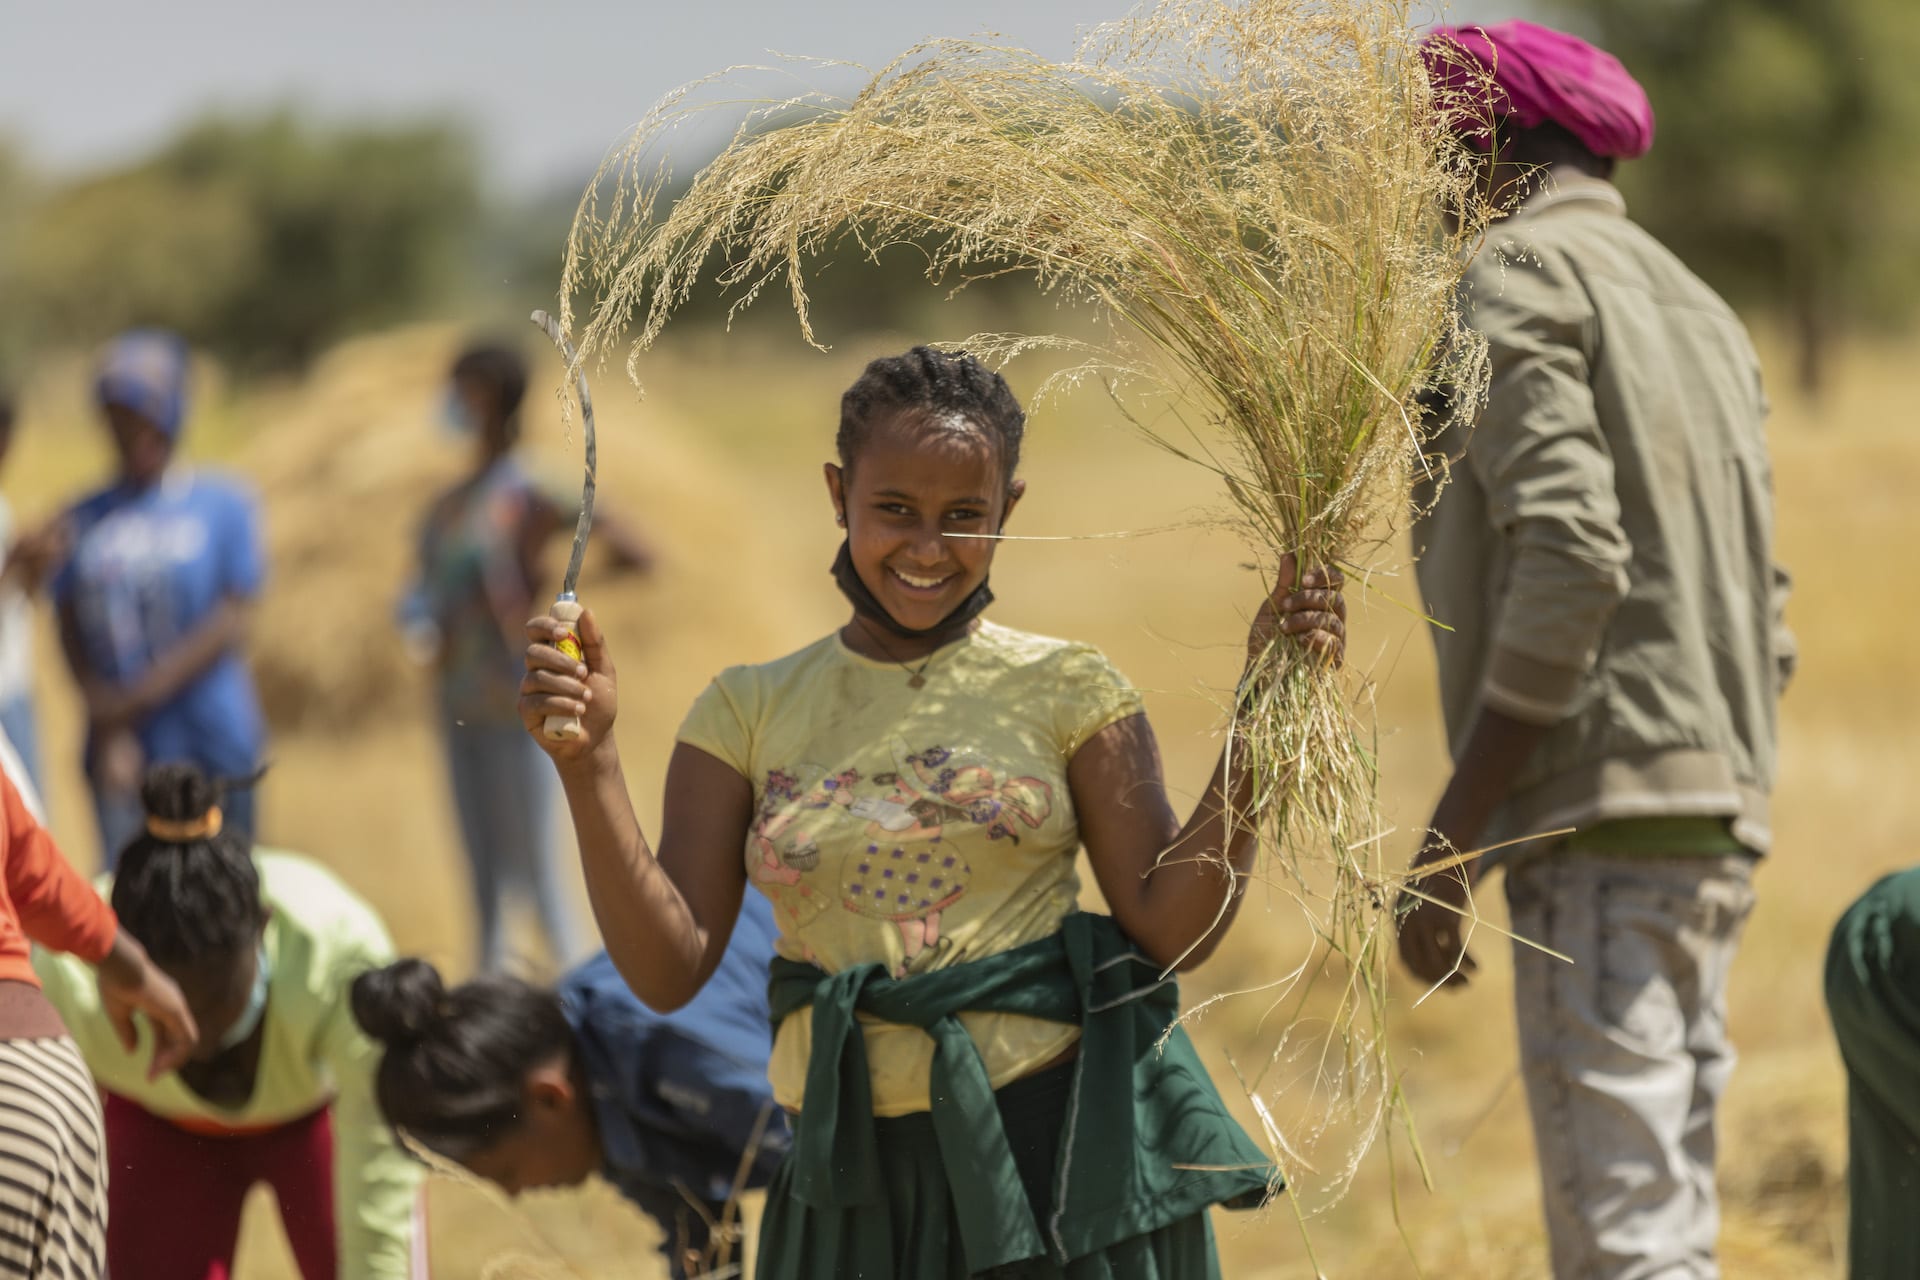 A teenage Ethiopian girl holds up a harvesting tool in one hand and a bunch of harvested wheat in the other. She is smiling and wearing a yellow t-shirt.